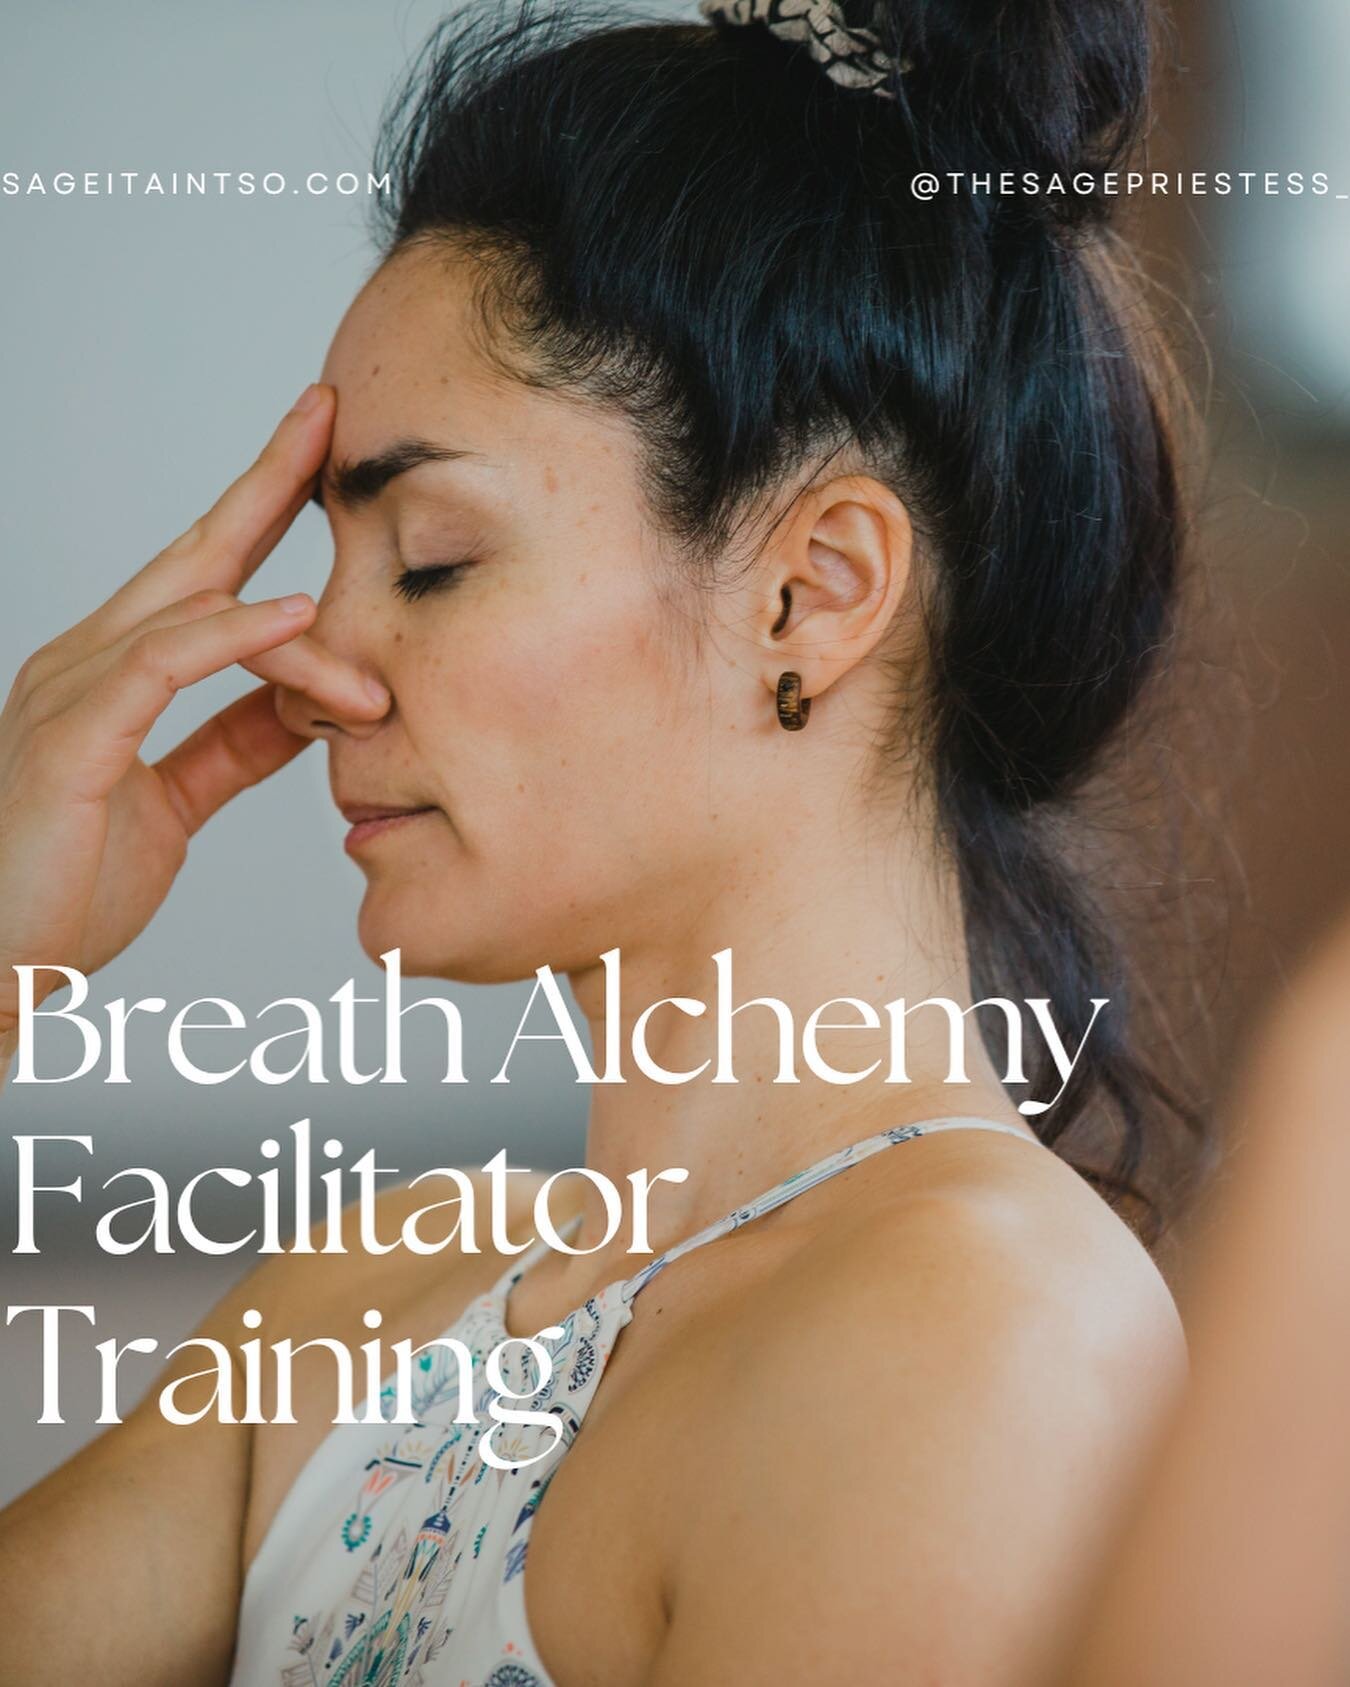 Ready to unlock the power of breathwork and energy healing? 

Our online course is designed to fit your schedule and teach you everything you need to know about this transformative practice. 
No prior experience needed.

Learn the foundations of brea